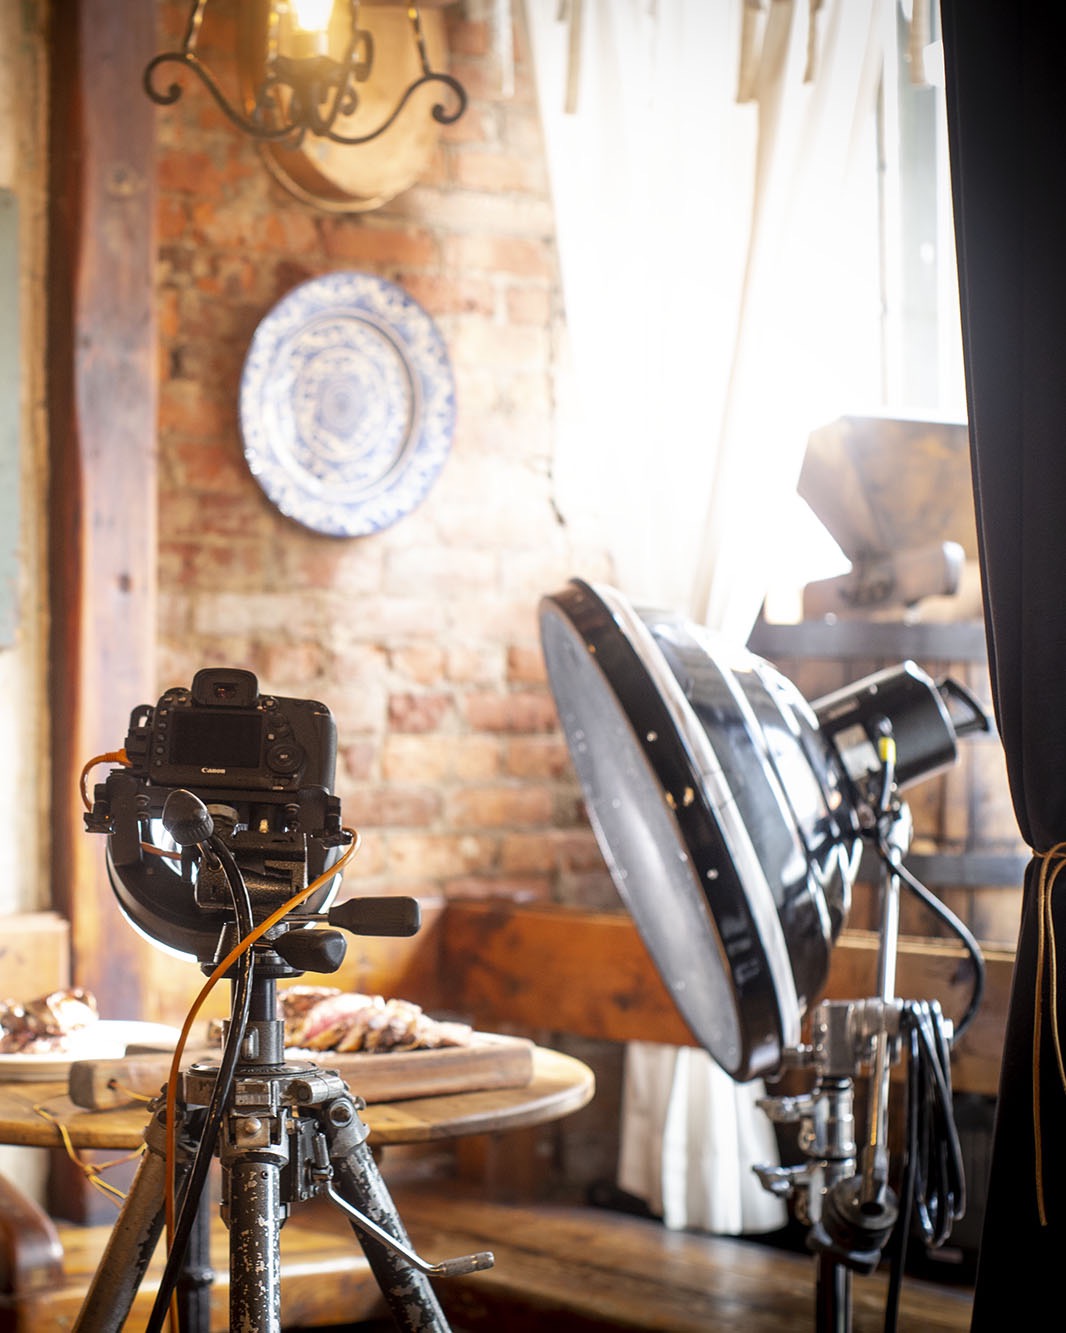 Italian food being photographed in a rustic Italian setting